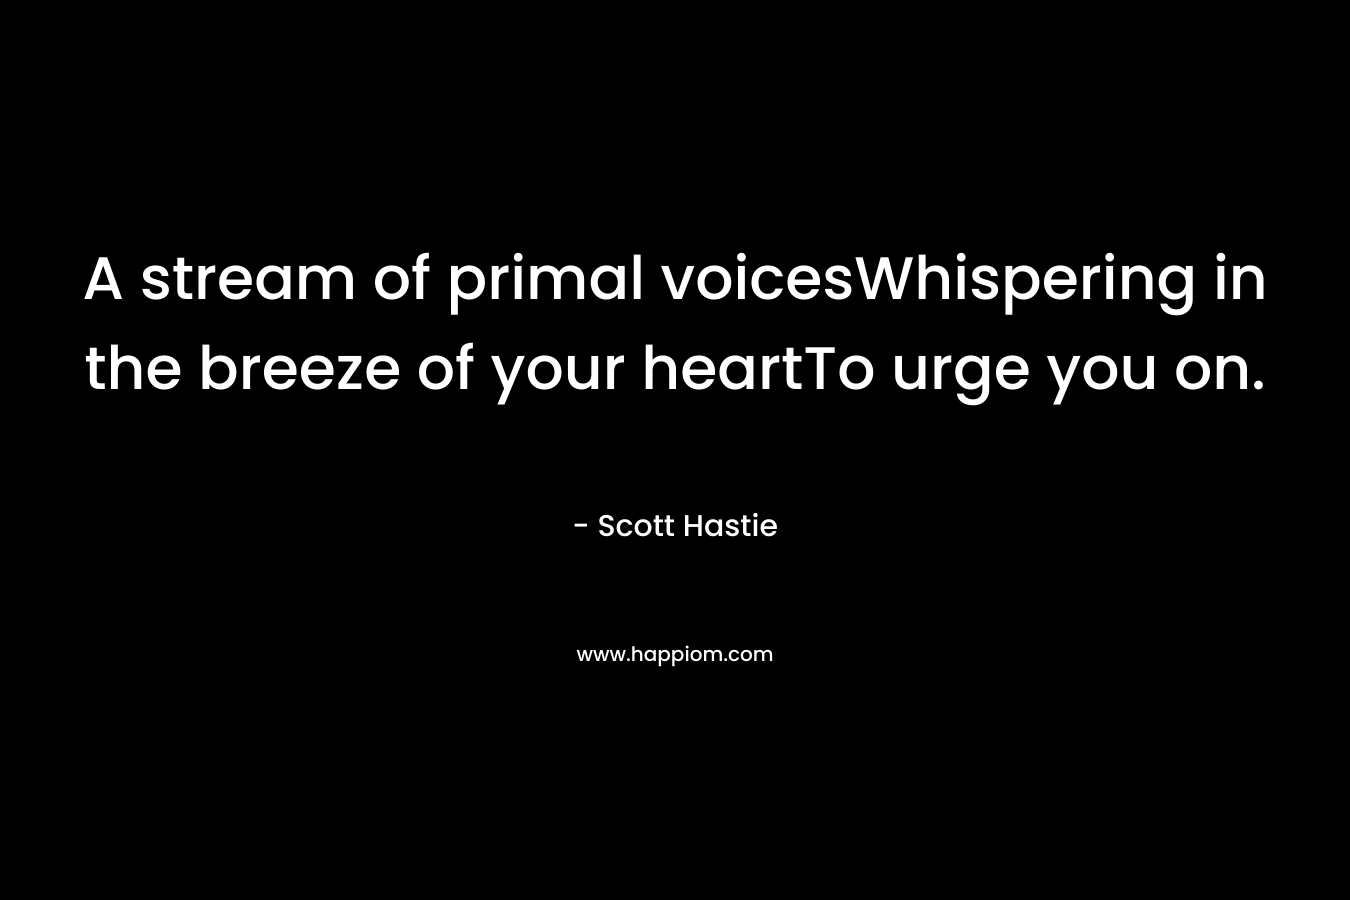 A stream of primal voicesWhispering in the breeze of your heartTo urge you on.